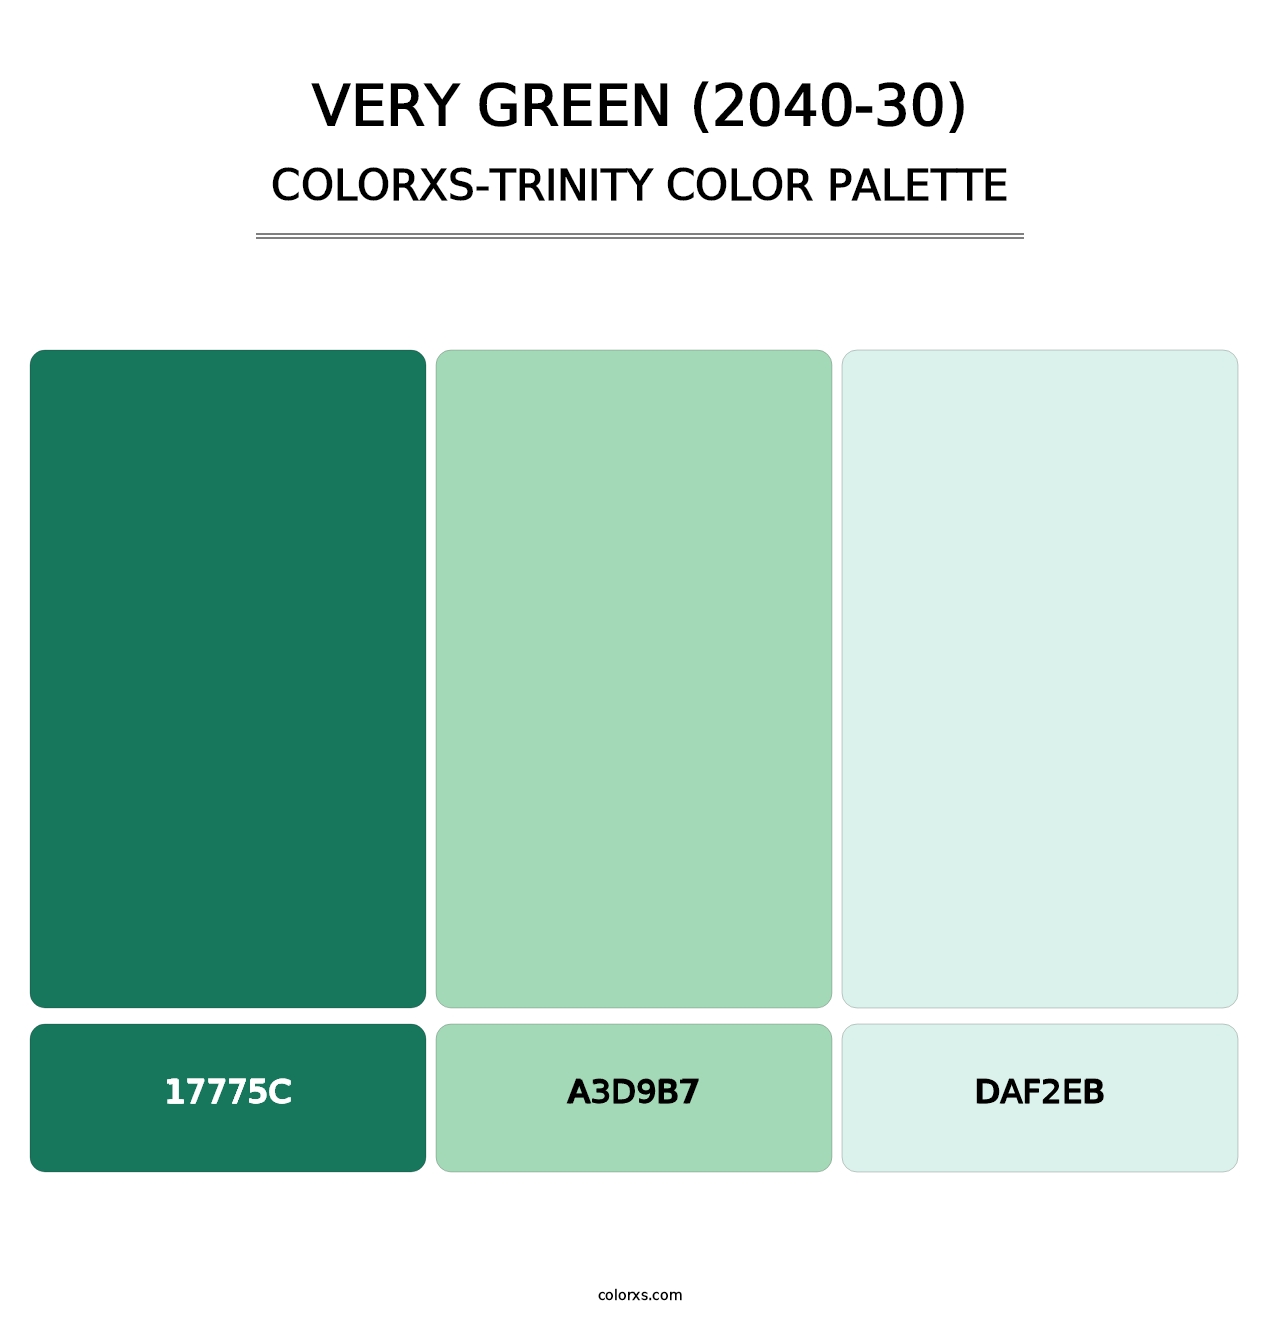 Very Green (2040-30) - Colorxs Trinity Palette